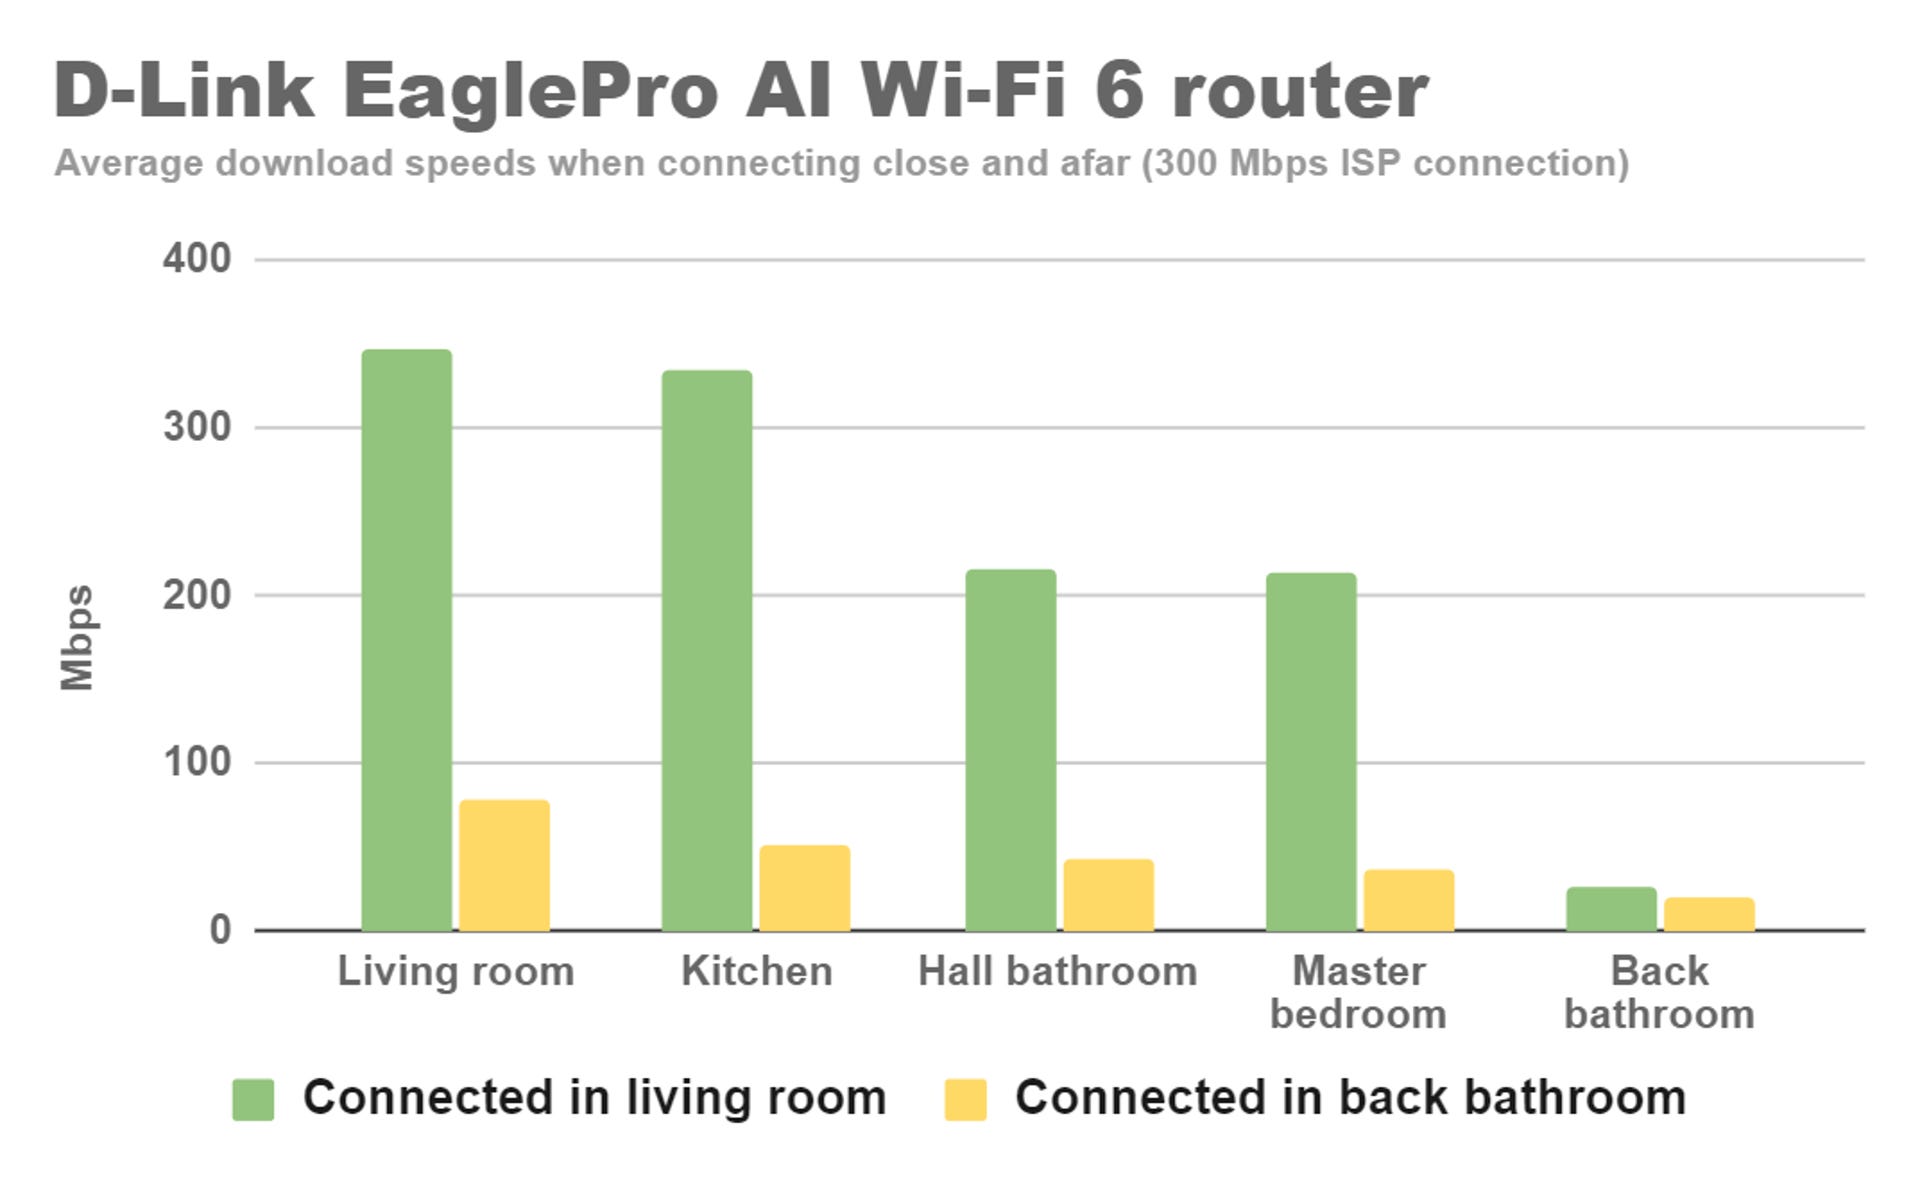 d-link-eaglepro-ai-wi-fi-6-router-close-and-far-download-speeds.png